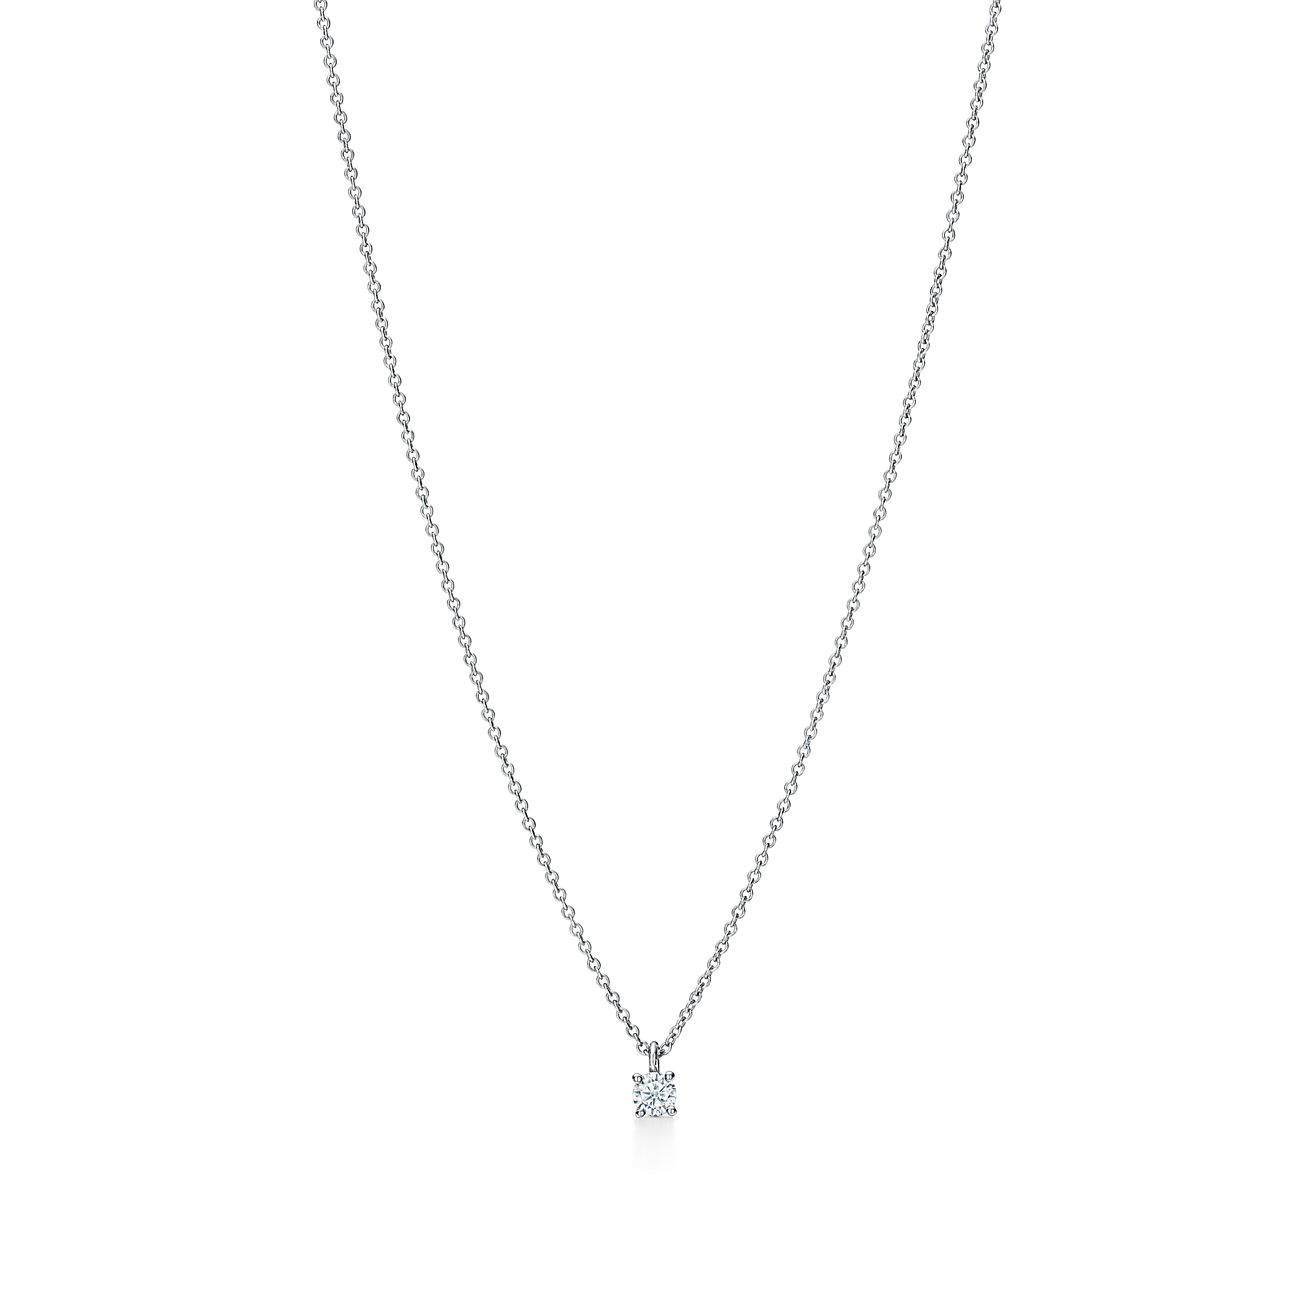 Lab Grown Diamond Necklace - A Sustainable And Ethical Choice For Wedding